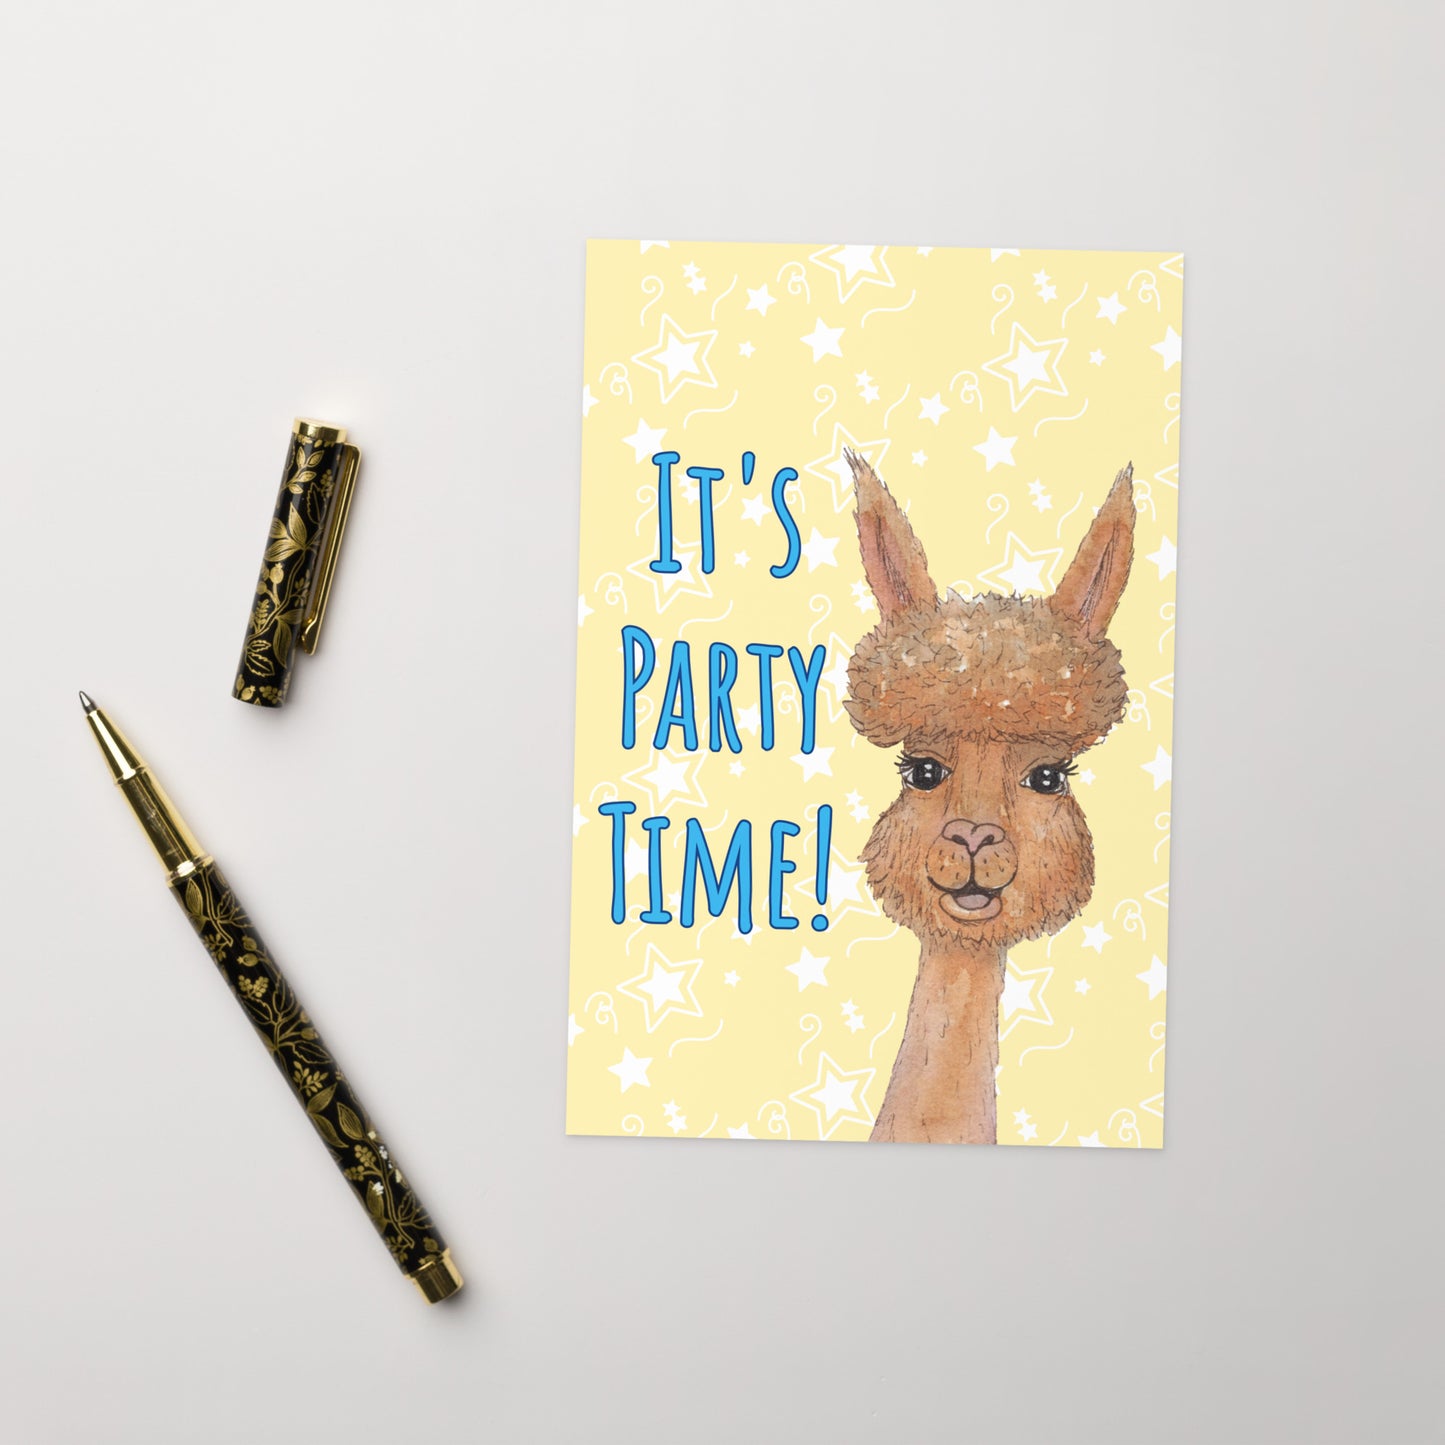 4 by 6 inch party alpaca greeting card and envelope. Image shows cover  by ballpoint pen. Background is pastel yellow with white star accents. Front has watercolor alpaca and text: It's party time!